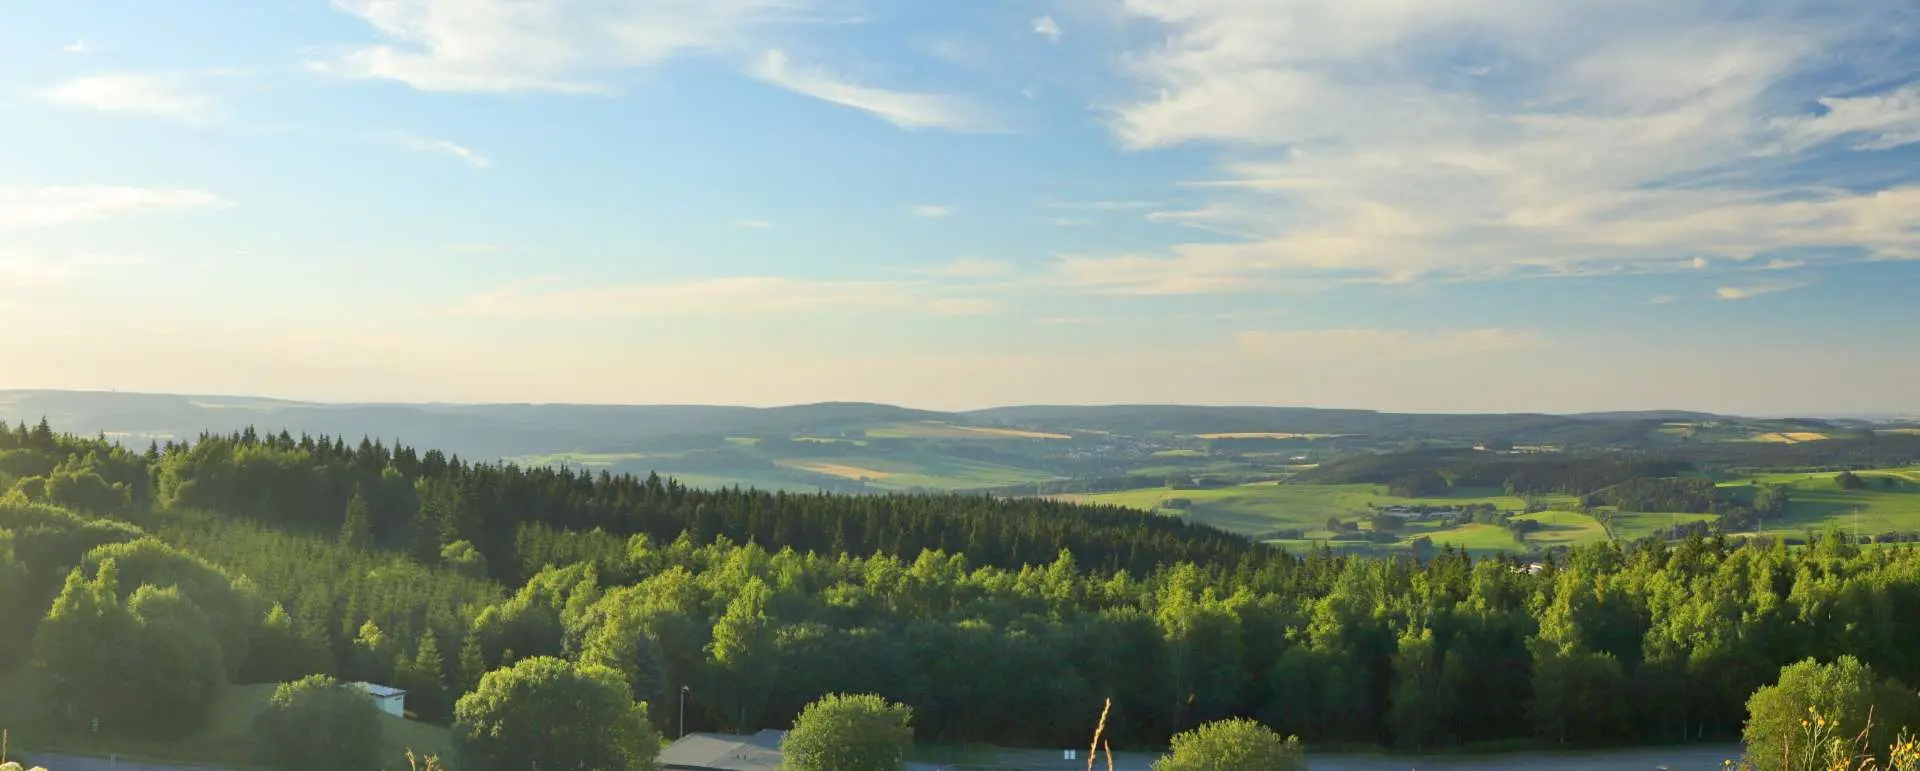 Ore Mountains - the destination for train travelers